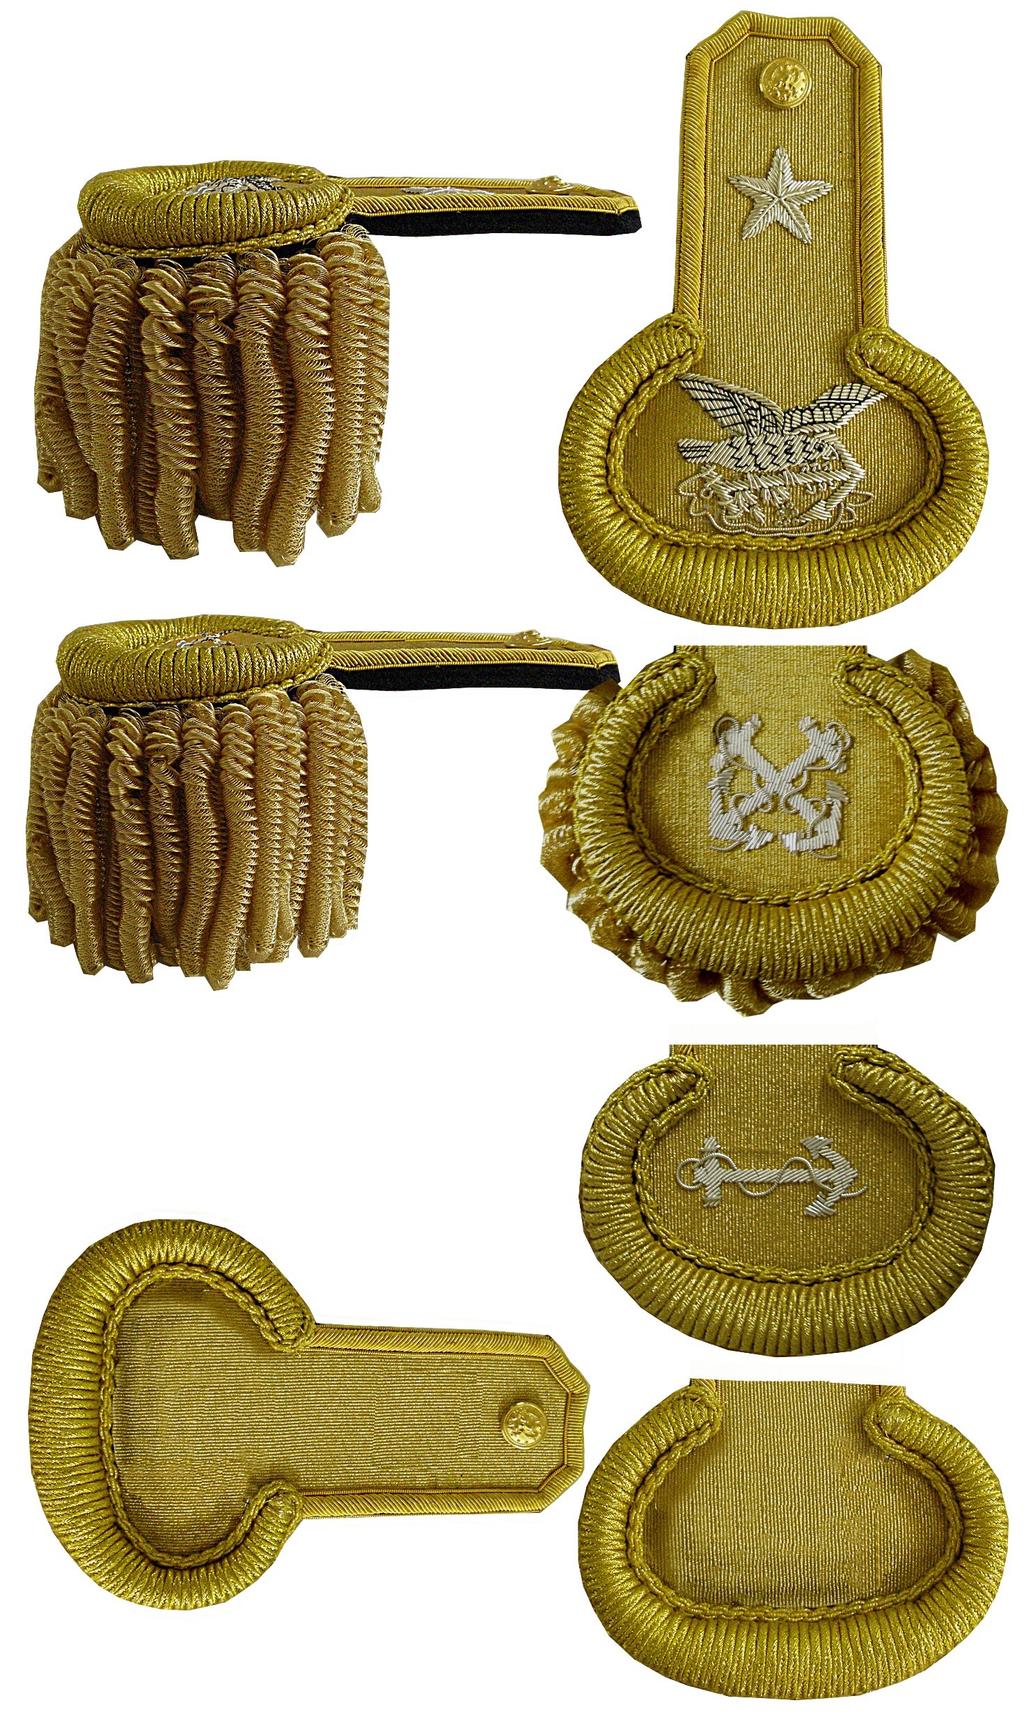 US Naval Officer full dress epaulets 1852 1861 Page 25 Naval Officer Epaulets were worn on the Full Dress Coat only.